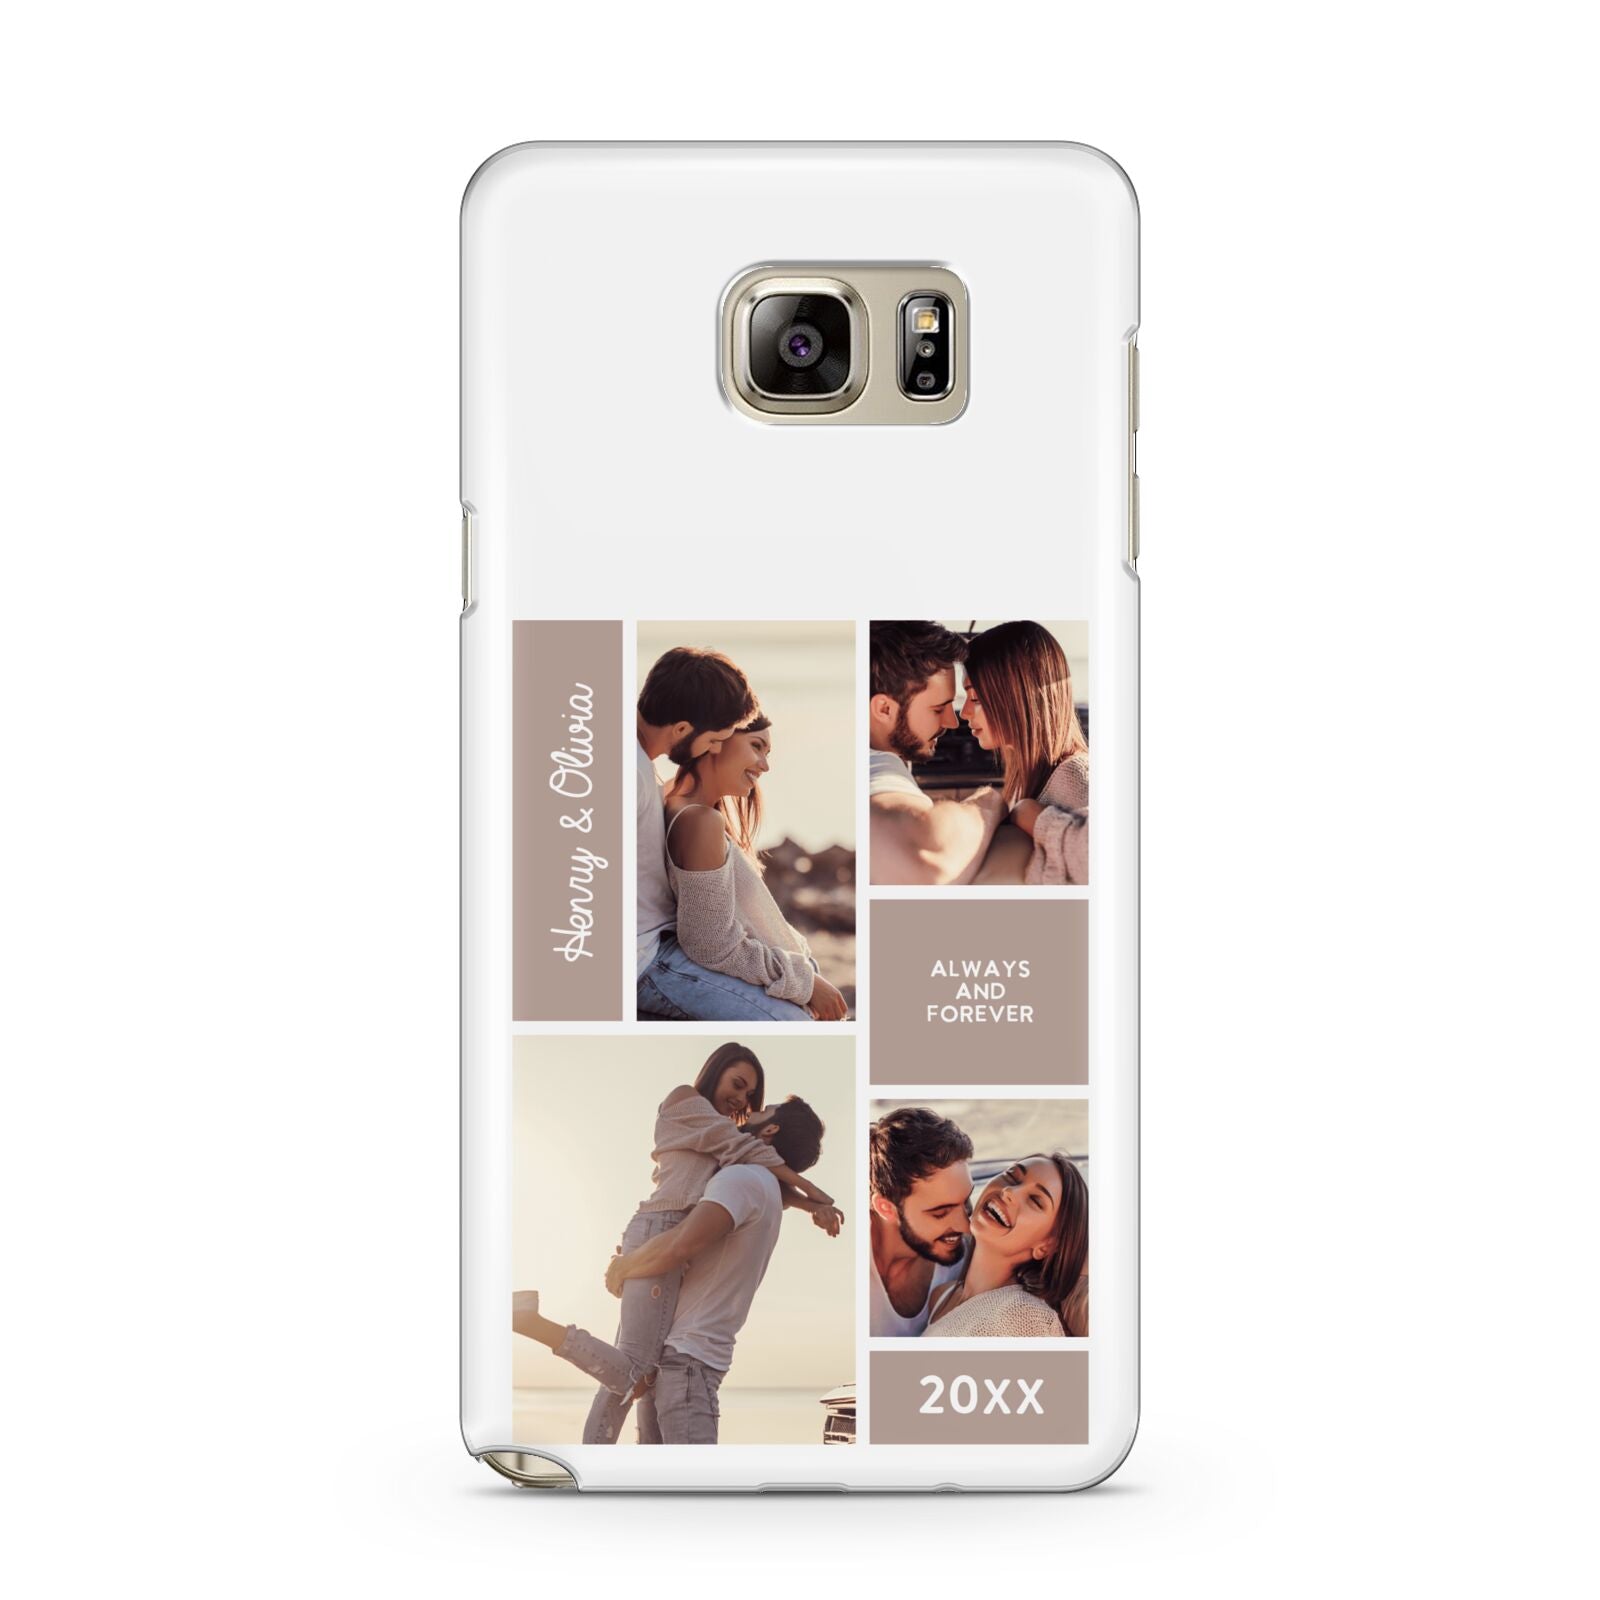 Couples Valentine Photo Collage Personalised Samsung Galaxy Note 5 Case